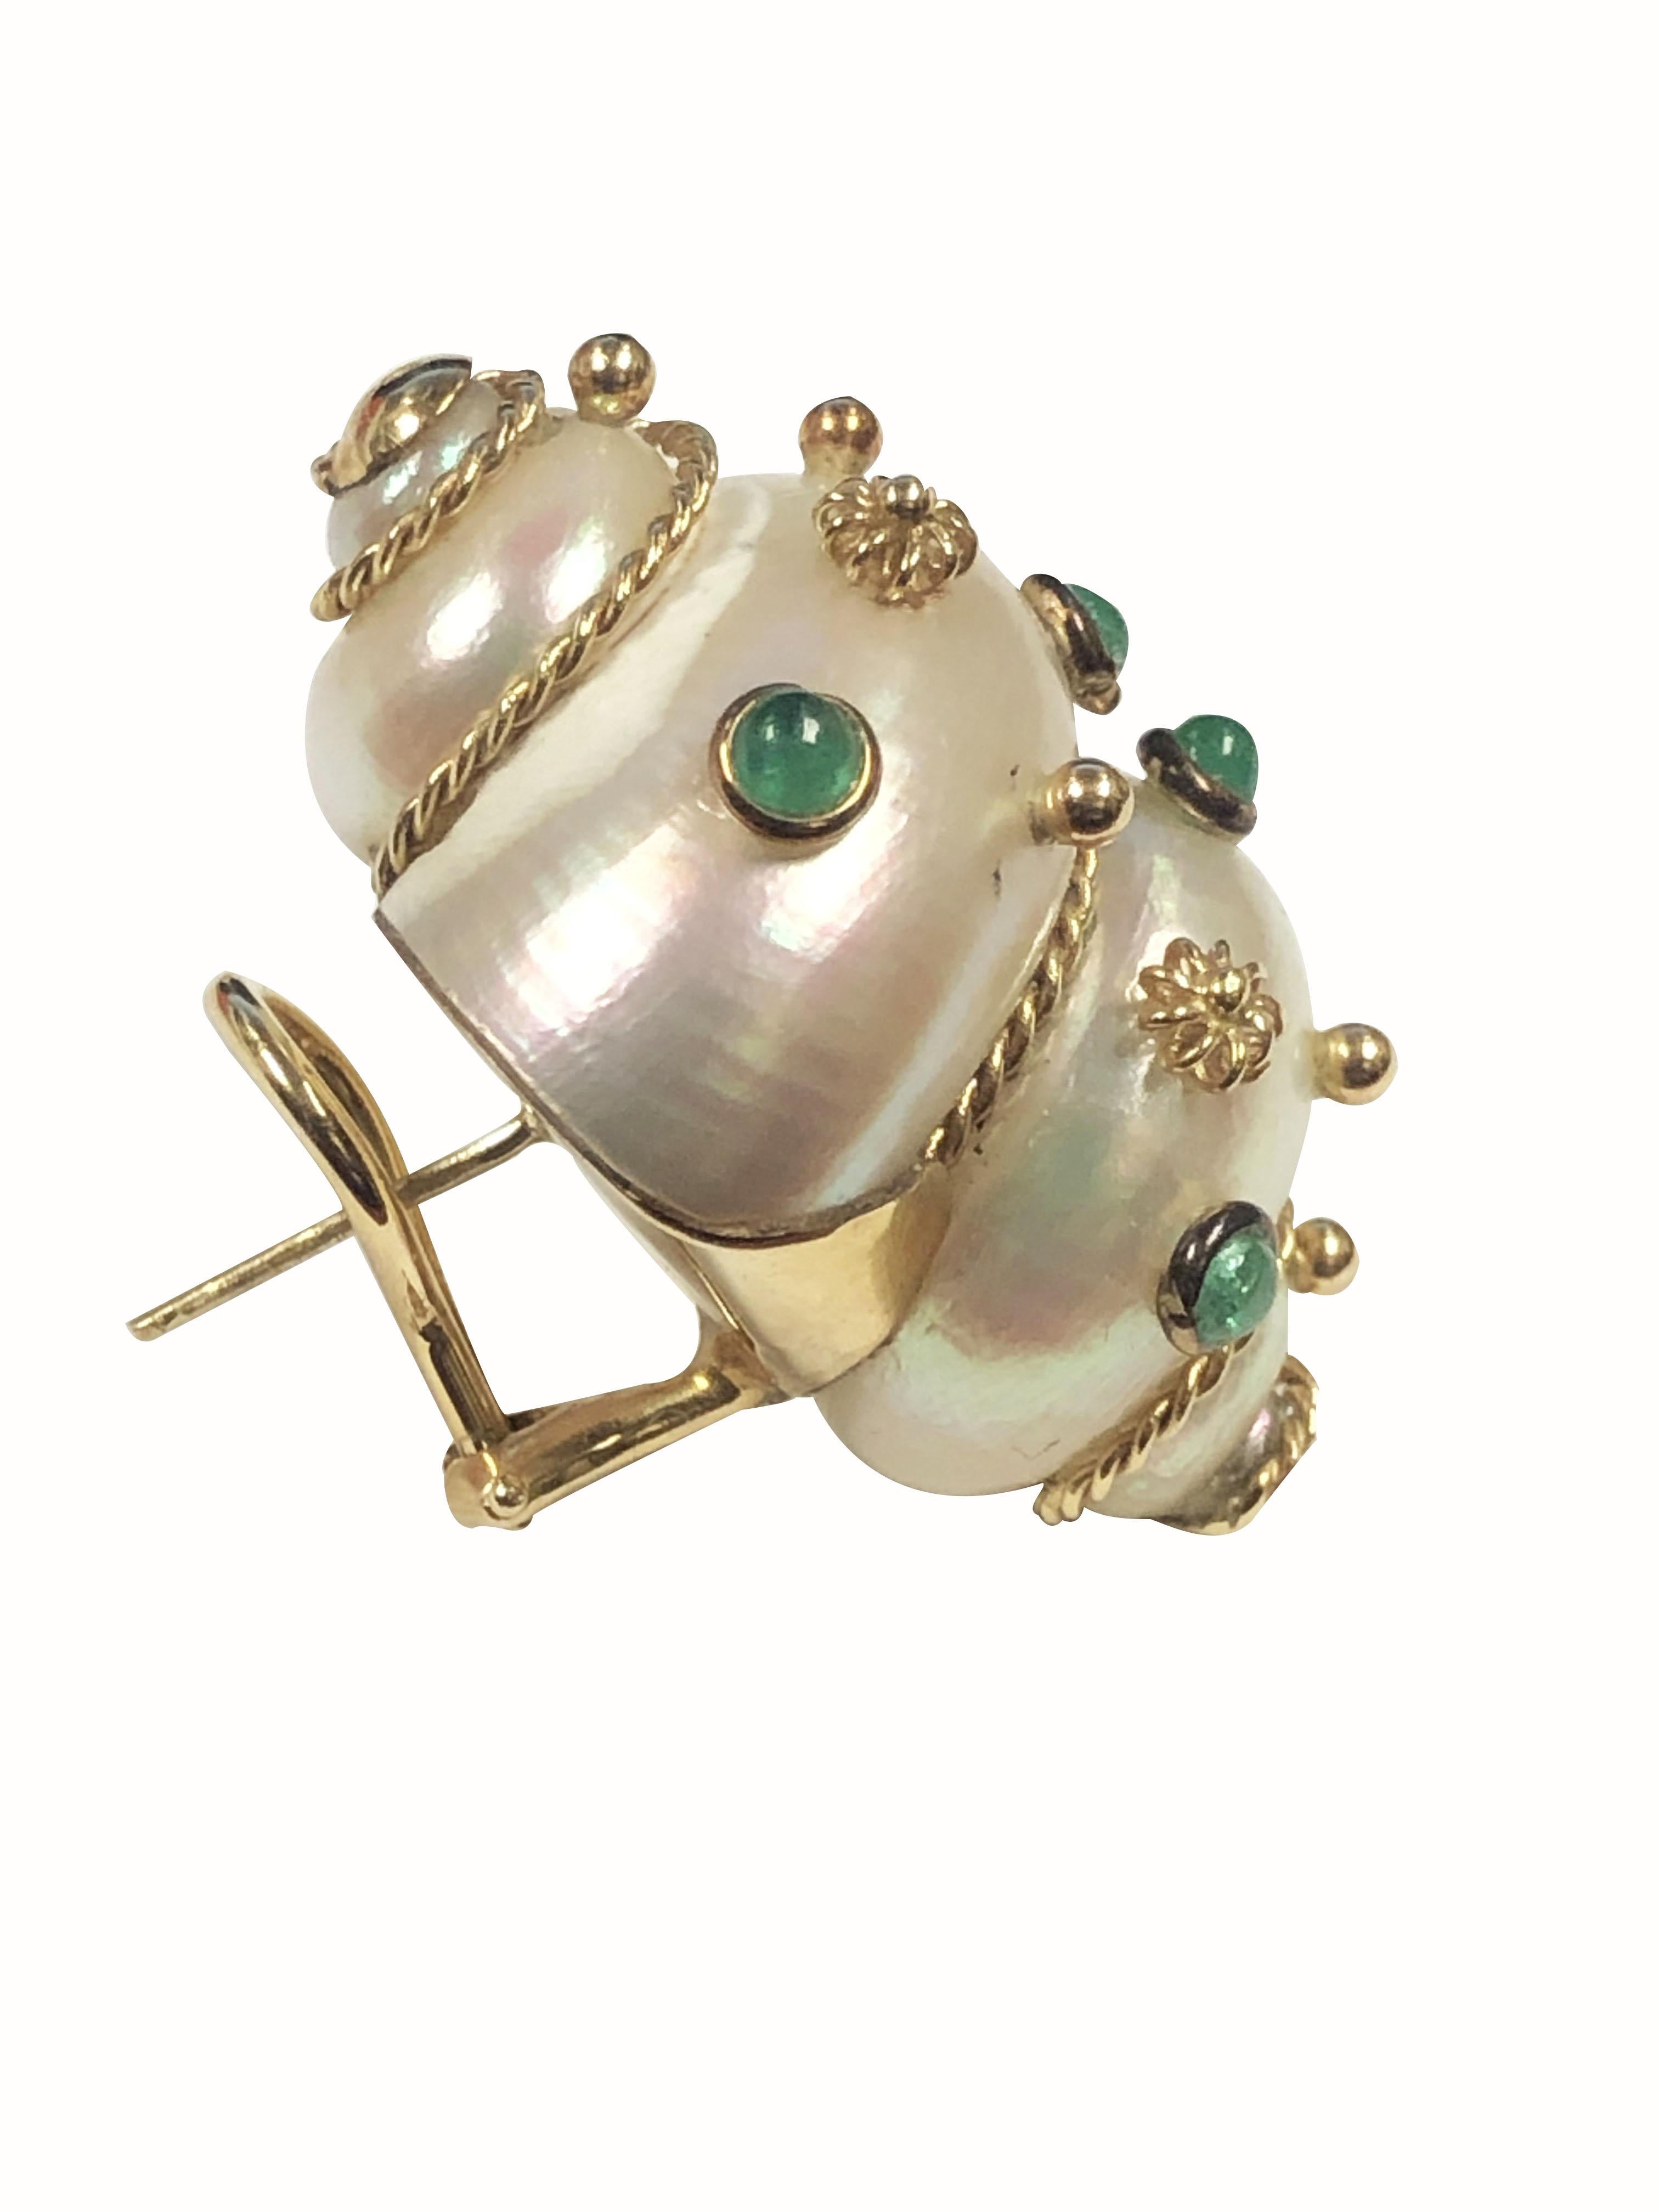 Circa 2000 Maz Turbo Shell Earrings, measuring 1 1/4 inches in length X 7/8 inch wide, 14K Yellow Gold backed and also having bezel set Cabochon Emeralds and further decorated with Gold accents. Omega clip backs with a post.